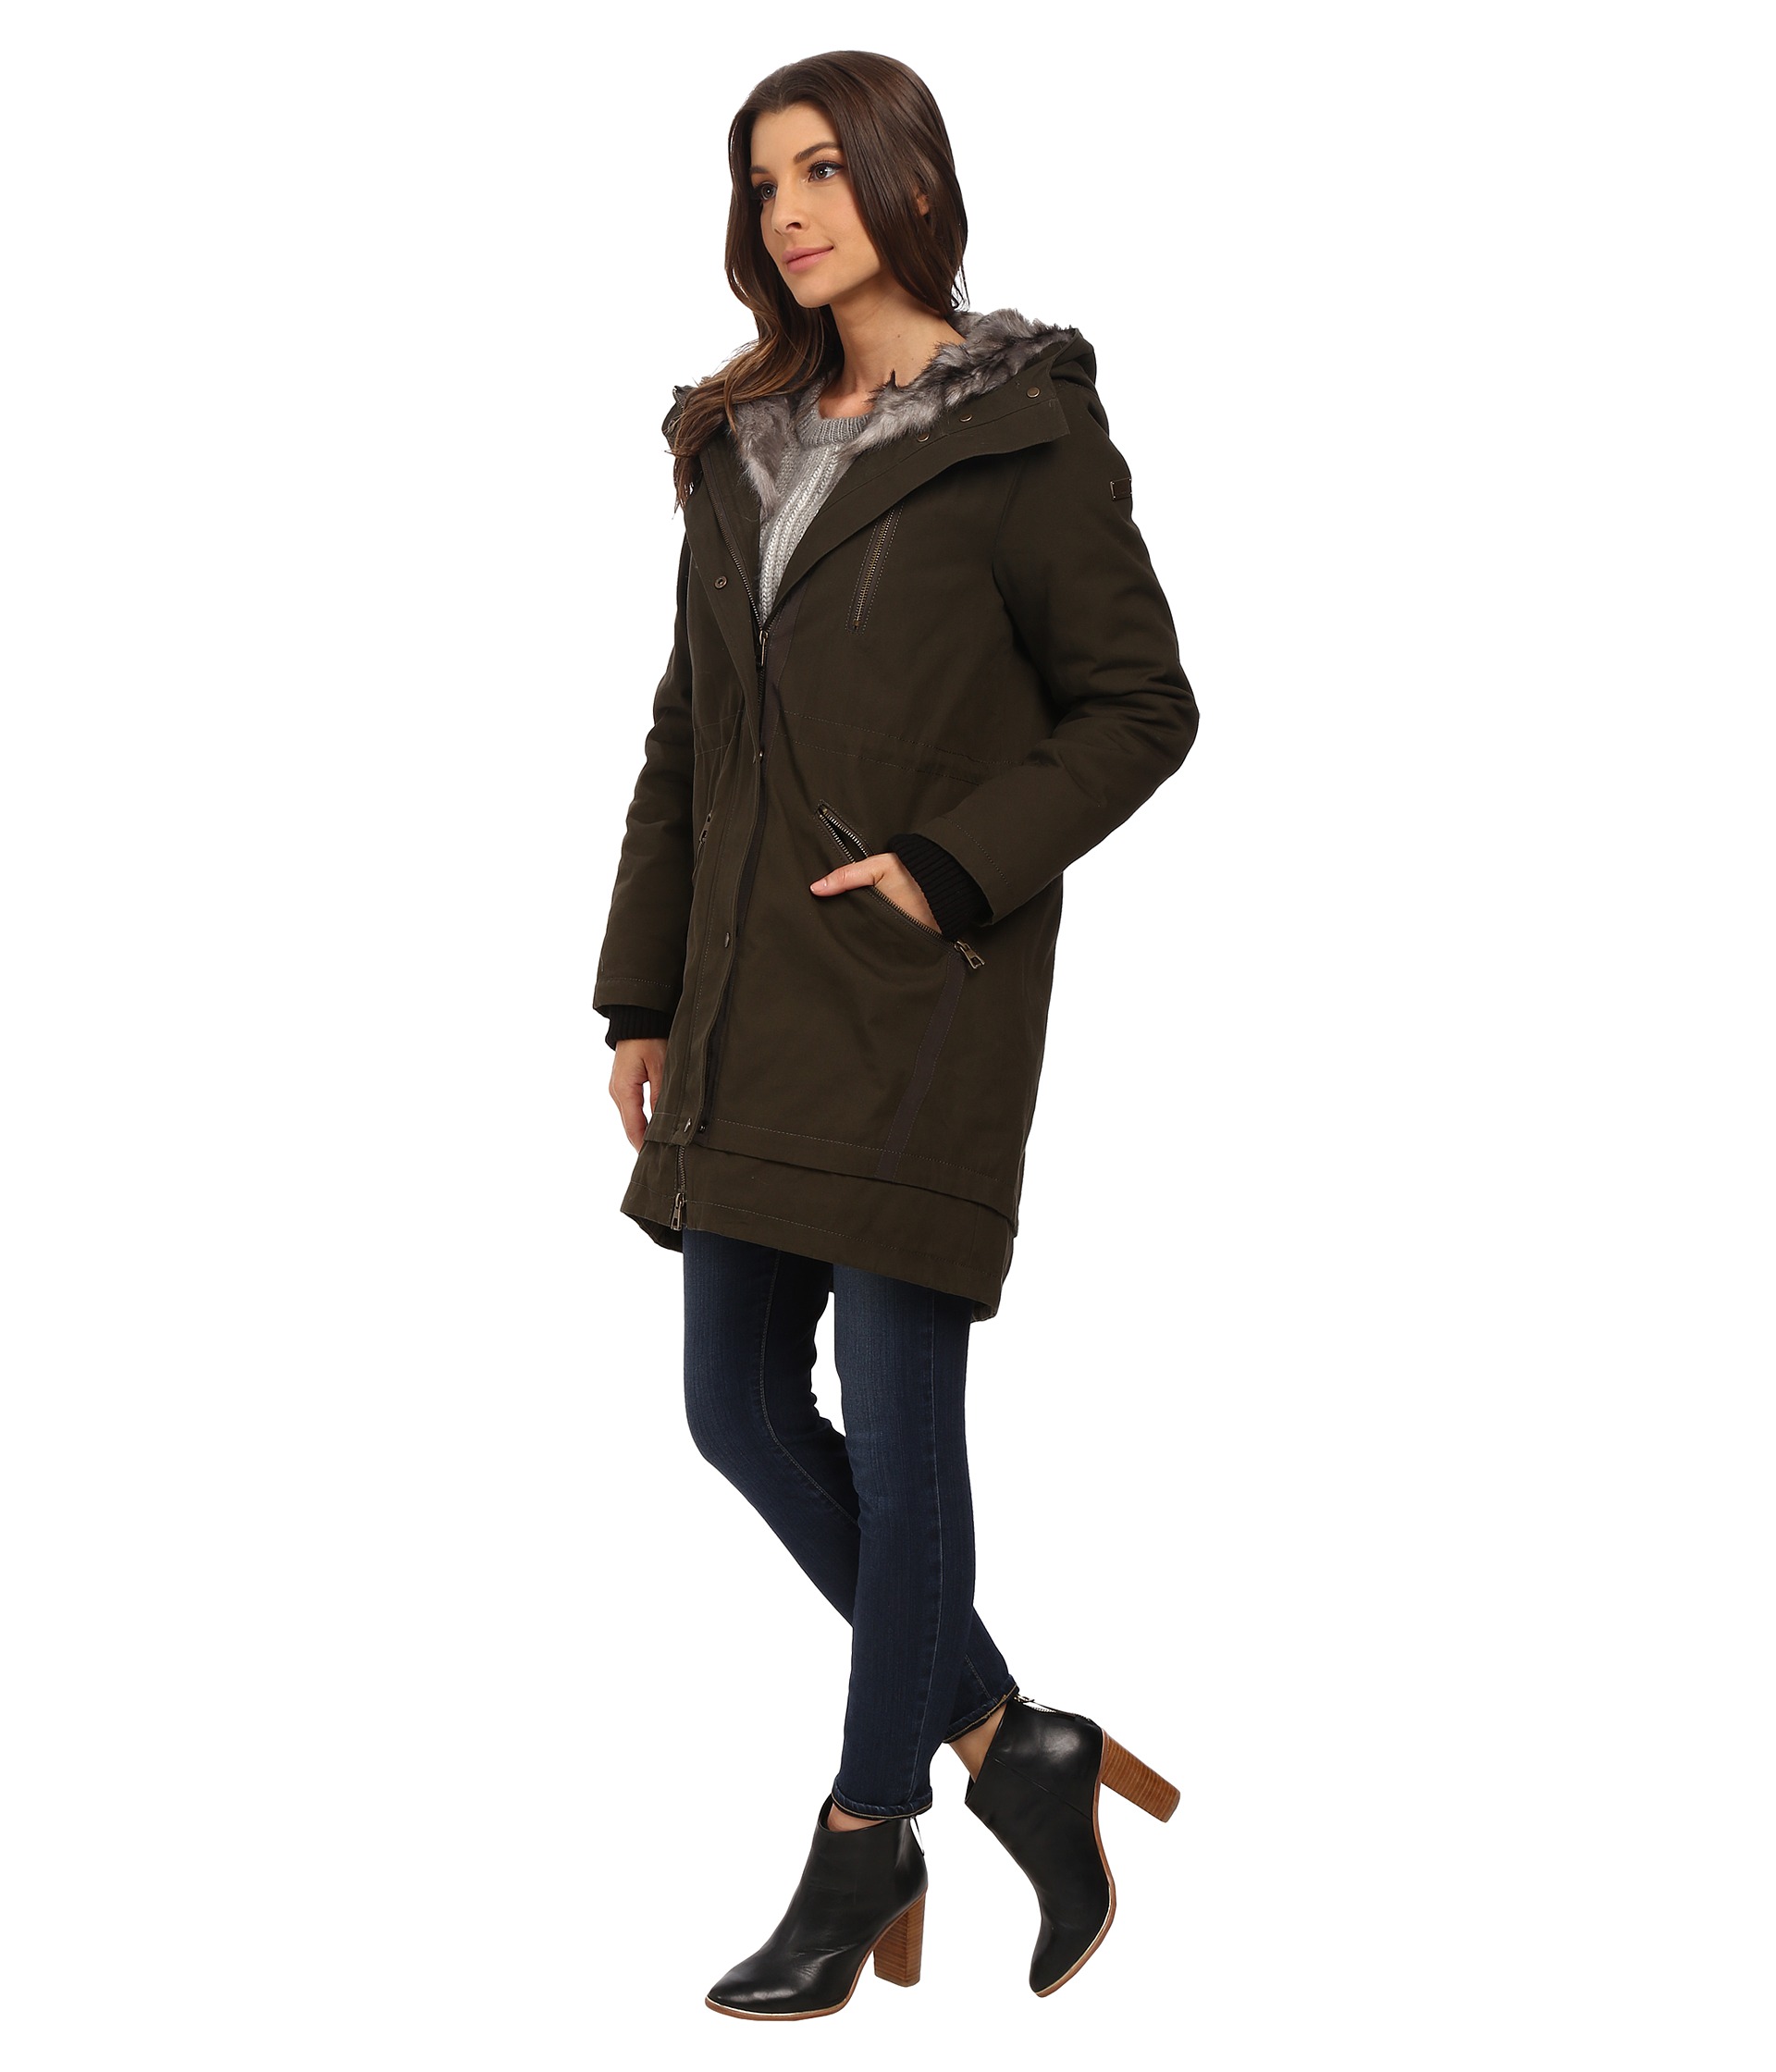 Vince Camuto Parka with Faux Fur Lined Hood J8851 Dark Olive - Zappos ...